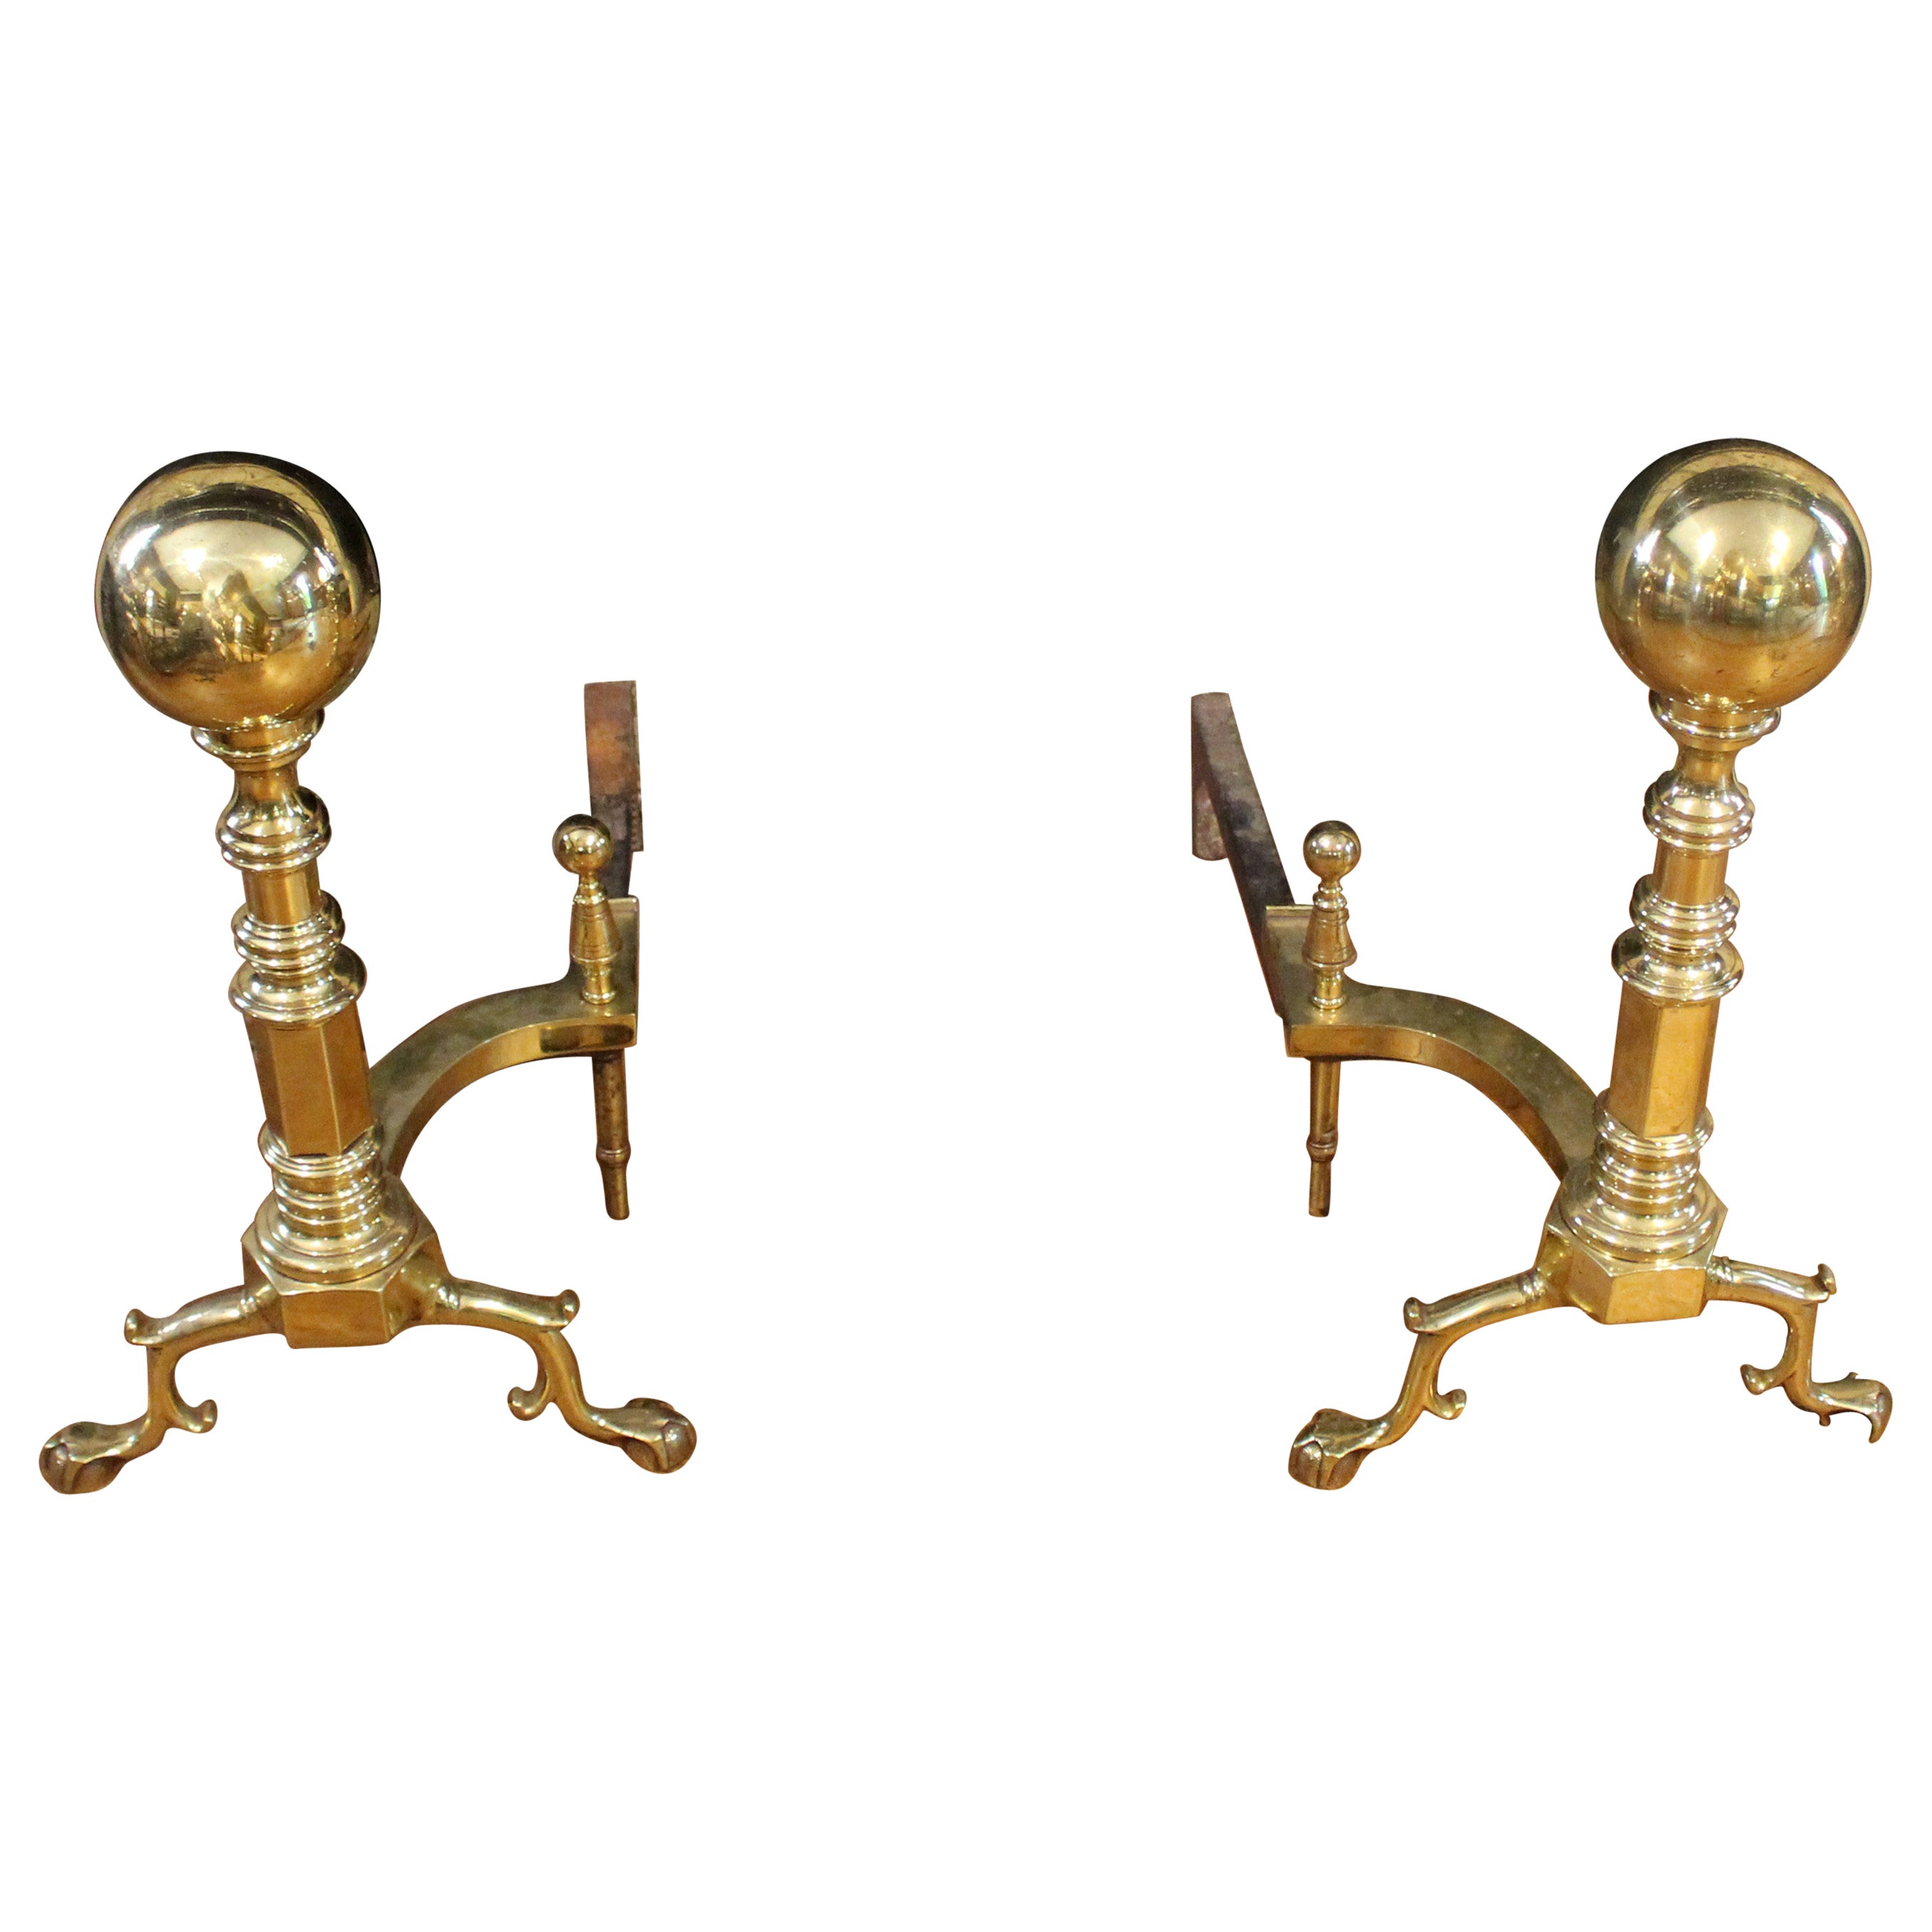 Pair of American Colonial Revival Brass Andirons For Sale